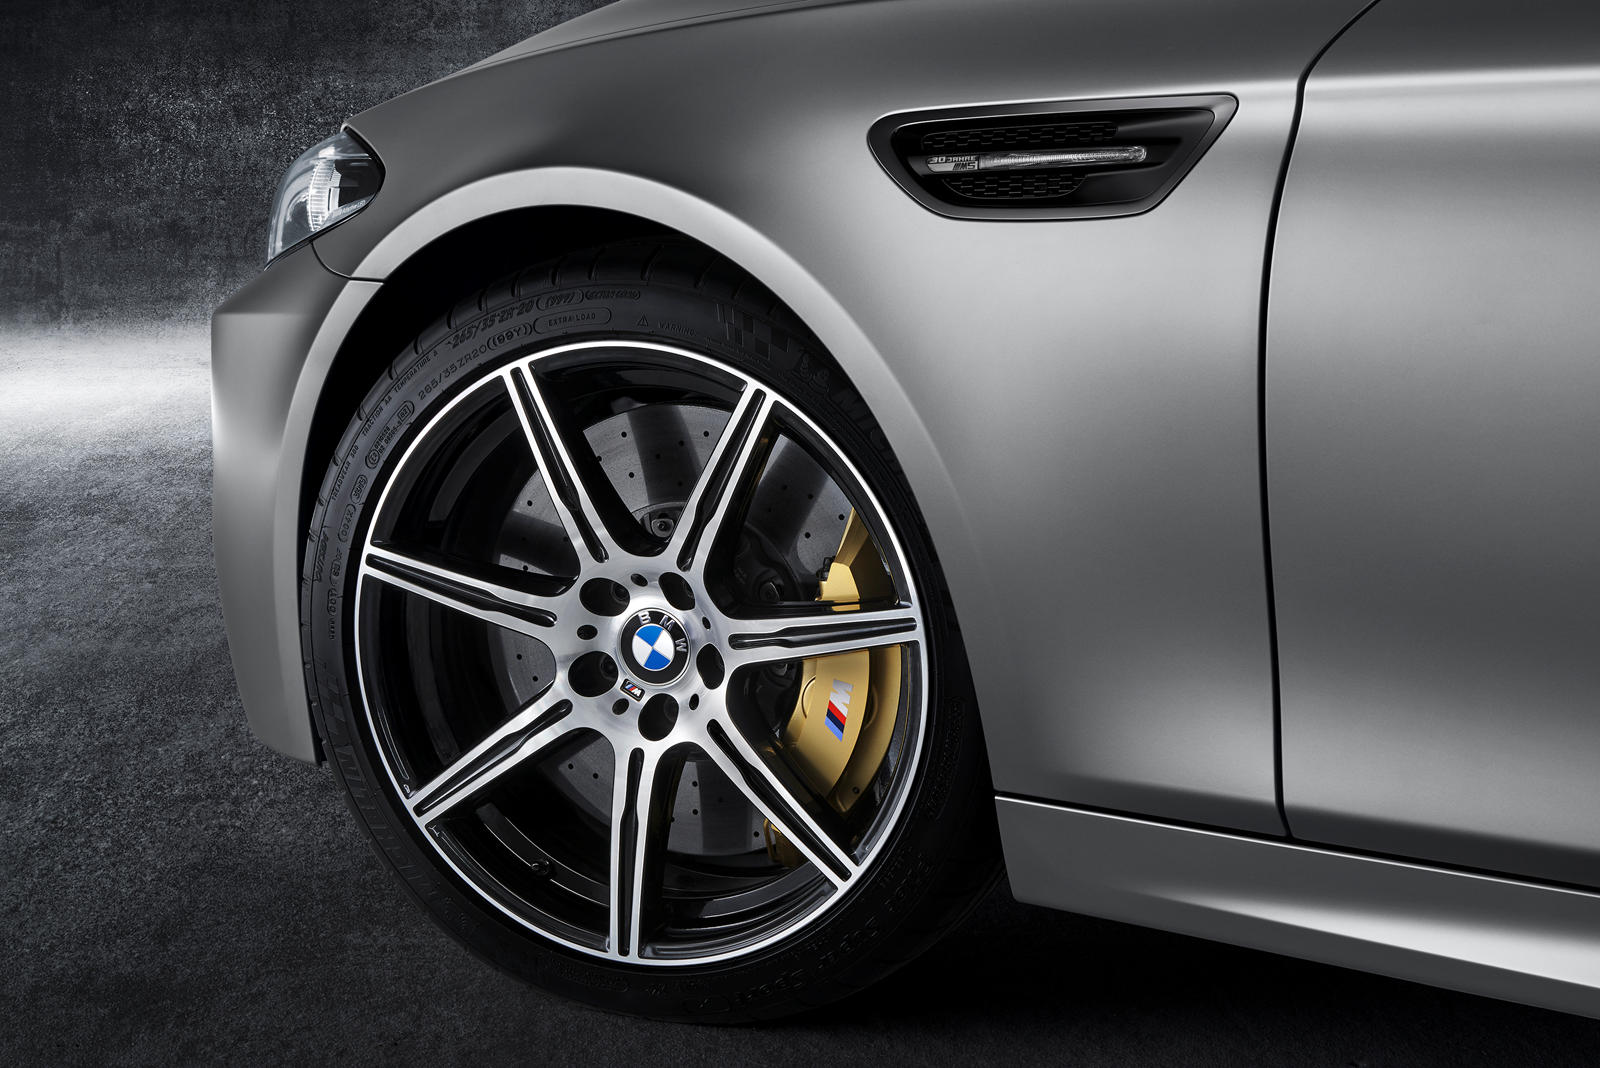 Special Edition 50 Jahre BMW M Coming Soon